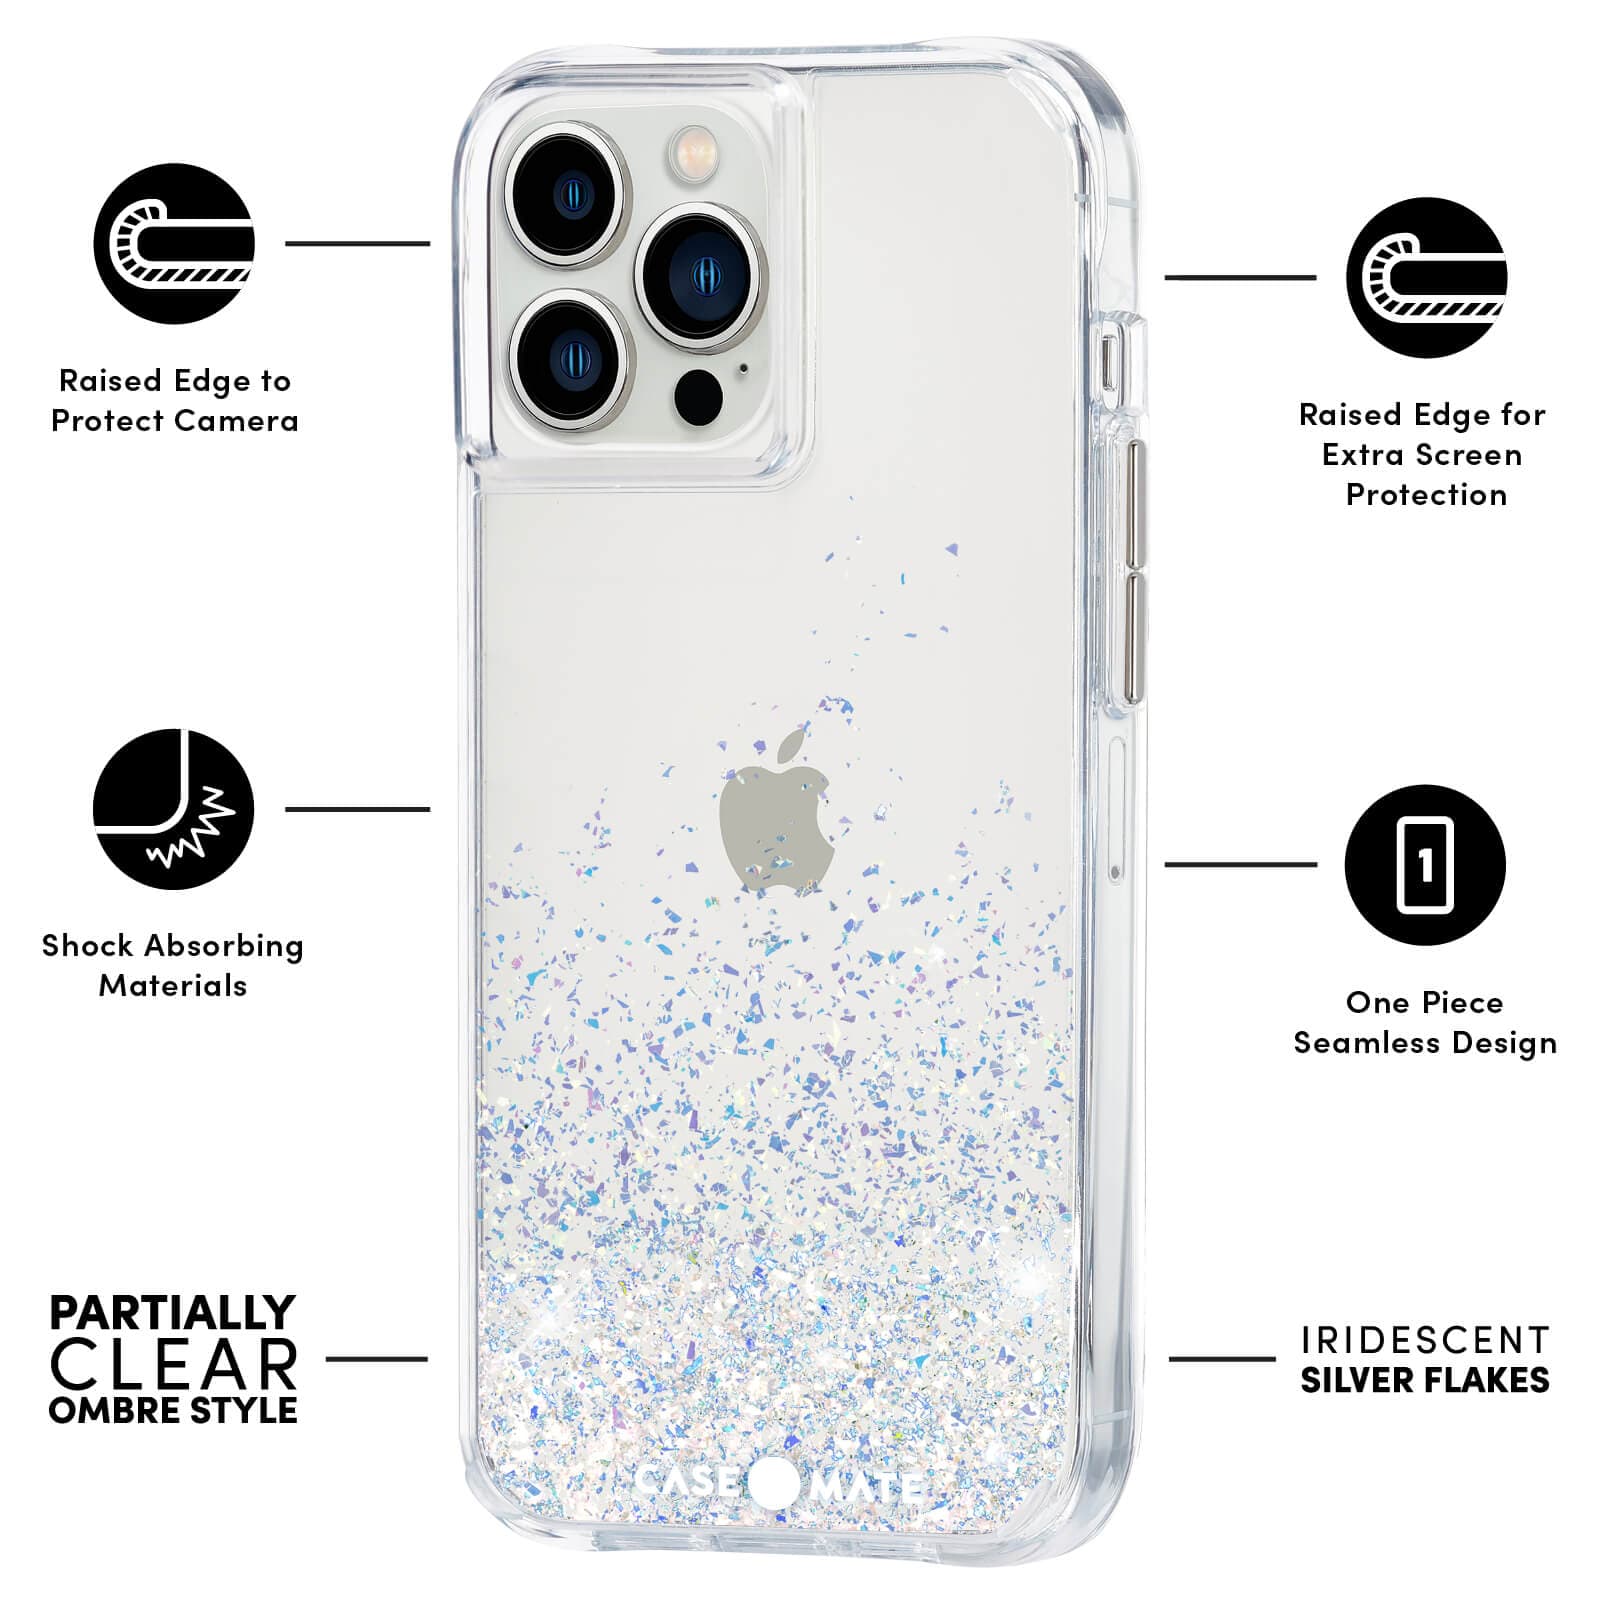 Features: raised edge to protect camera, shock absorbing materials, partially clear ombre style, raised edge for extra screen protection, one piece seamless design, iridescent silver flakes. color::Twinkle Stardust